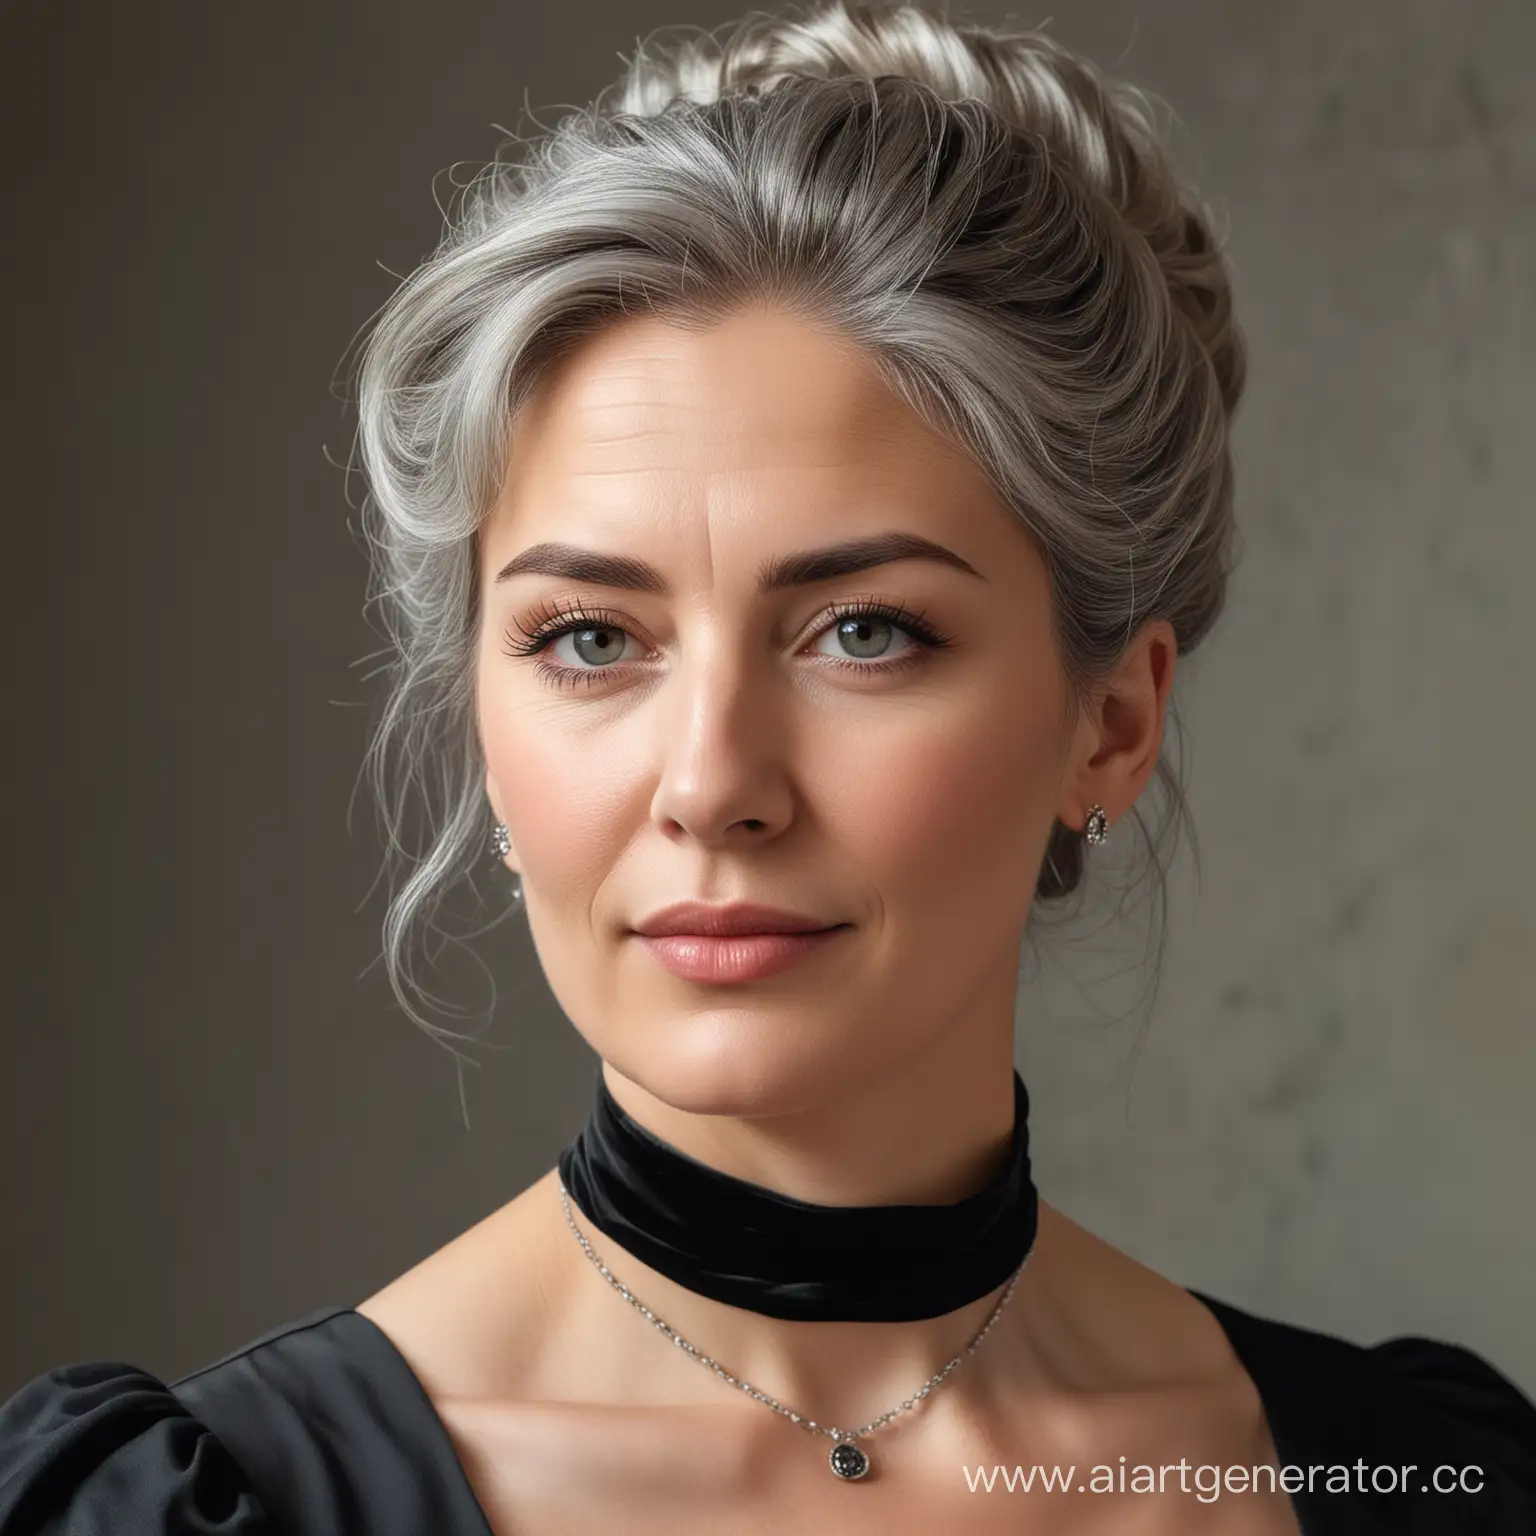 Elegant-Mature-Woman-Portrait-with-Gray-Hair-and-Black-Dress